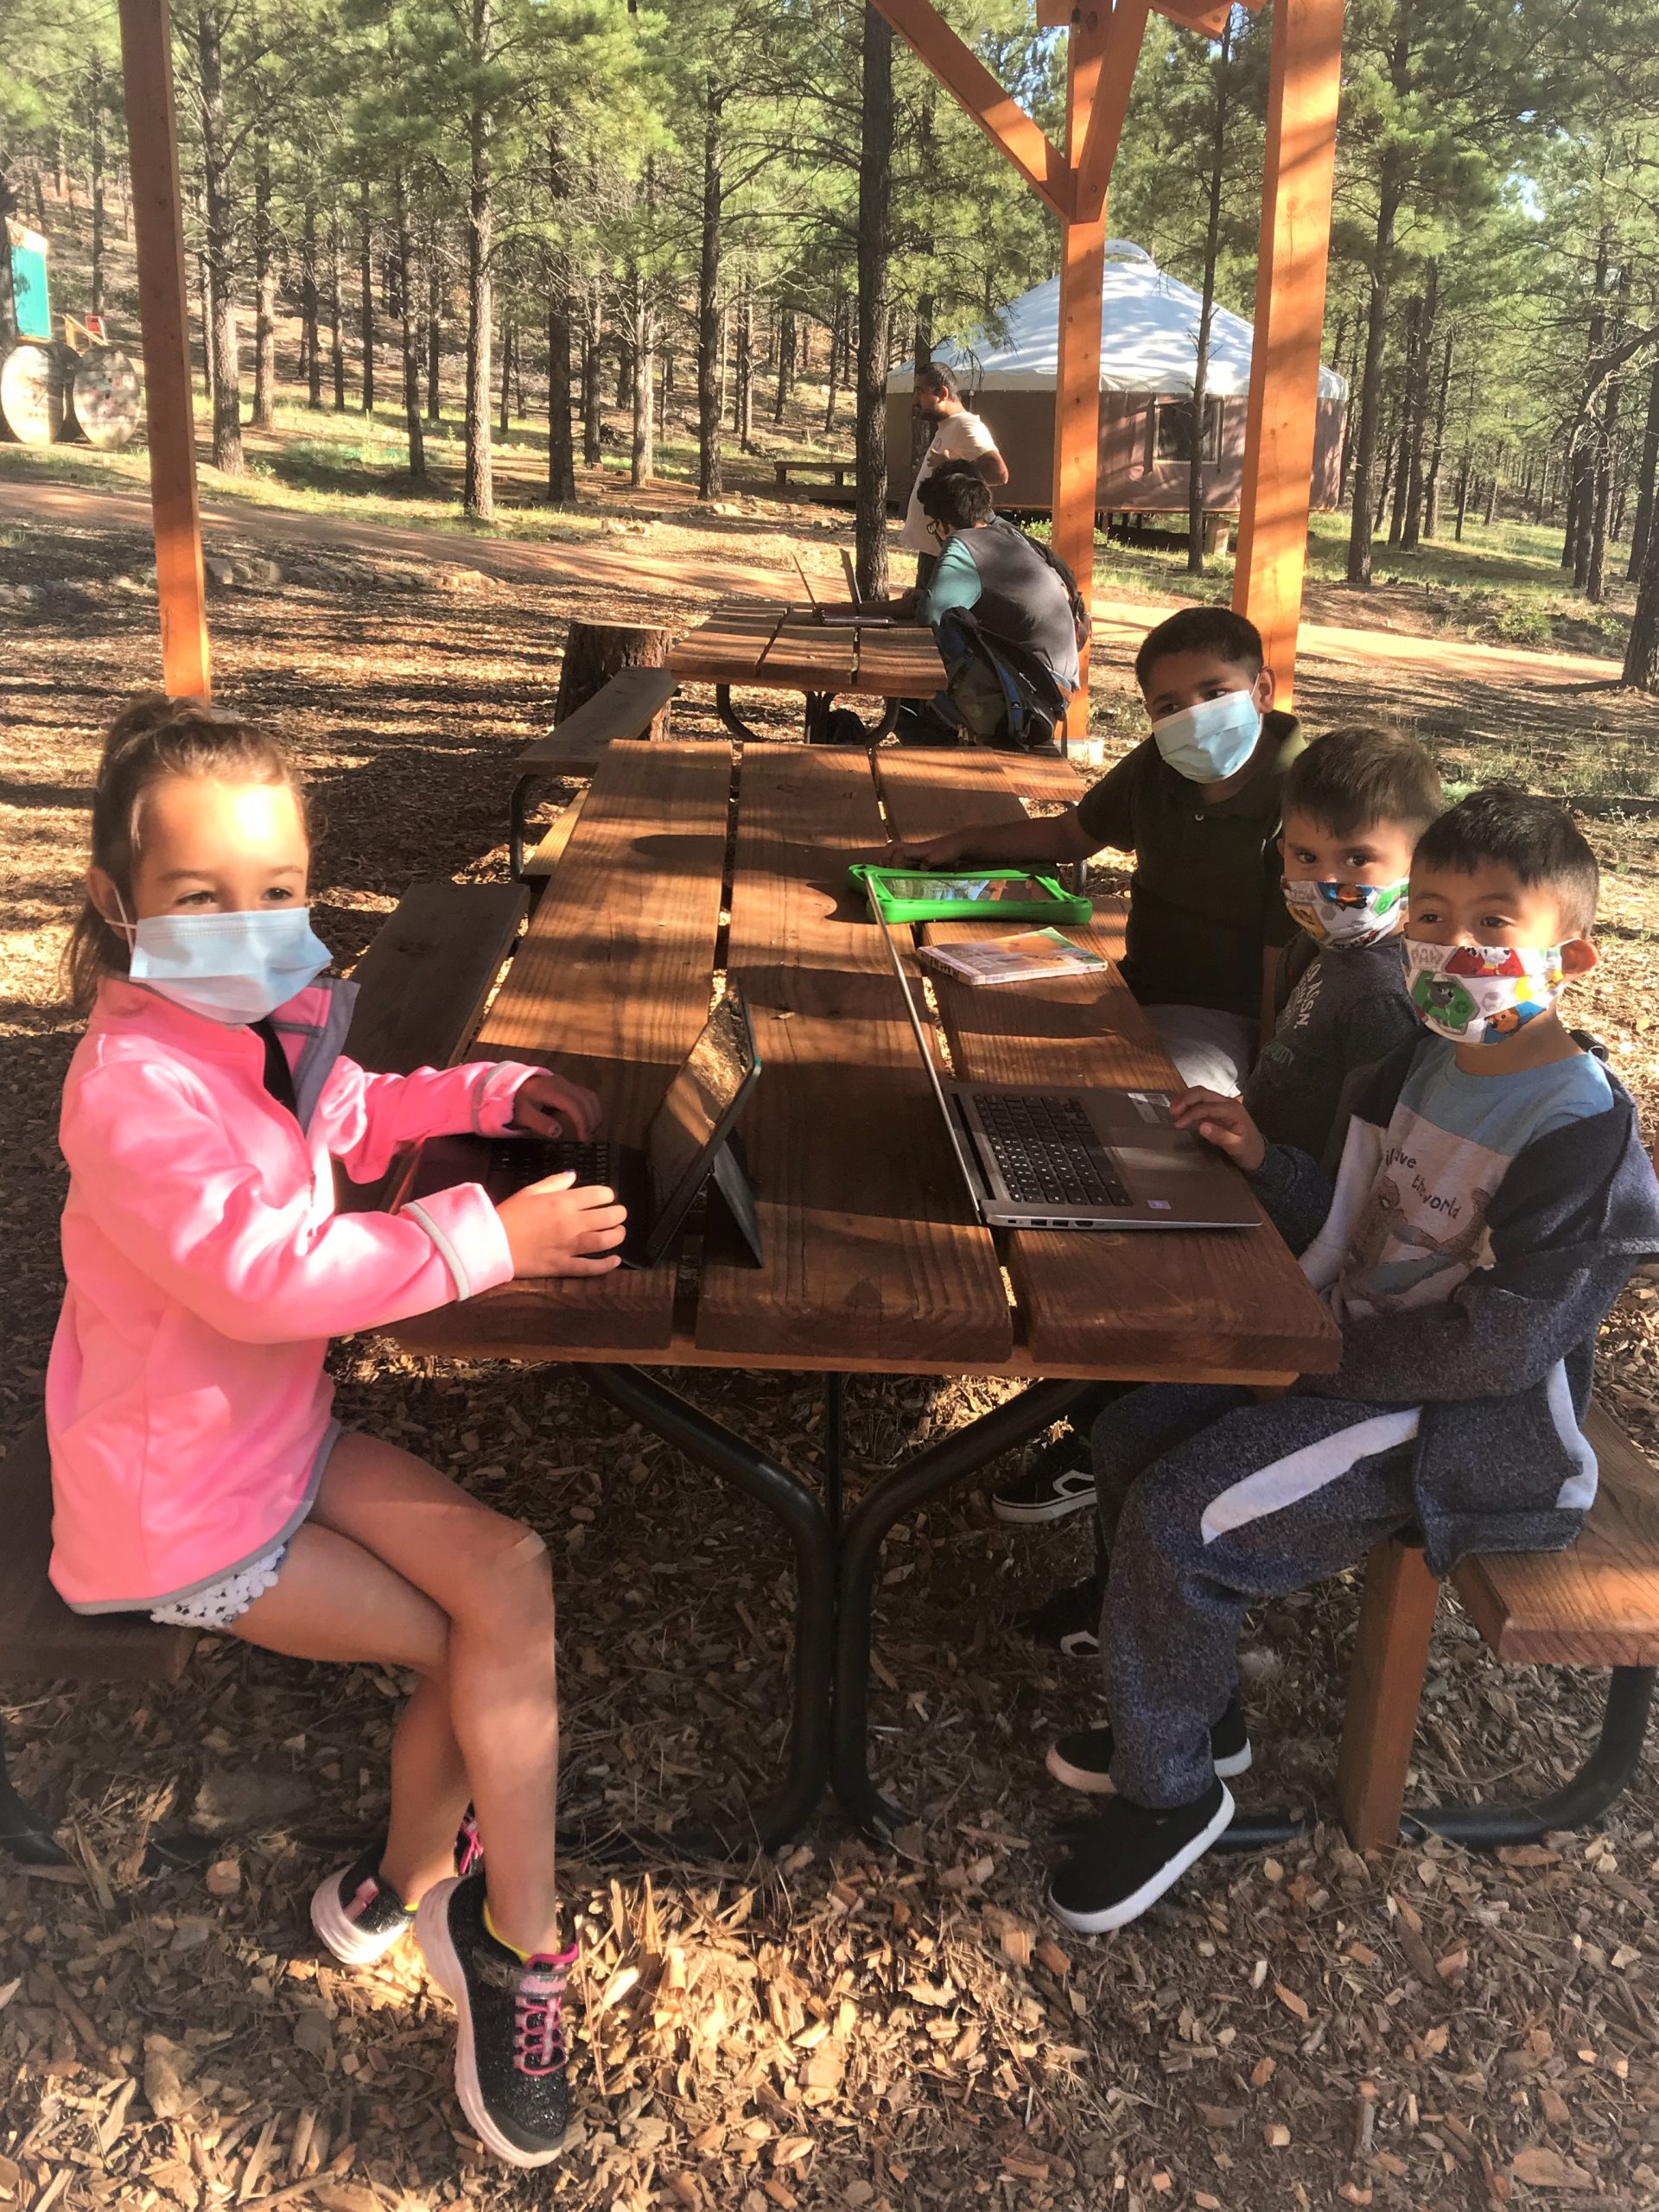 Image shows children in outdoor classroom setting.